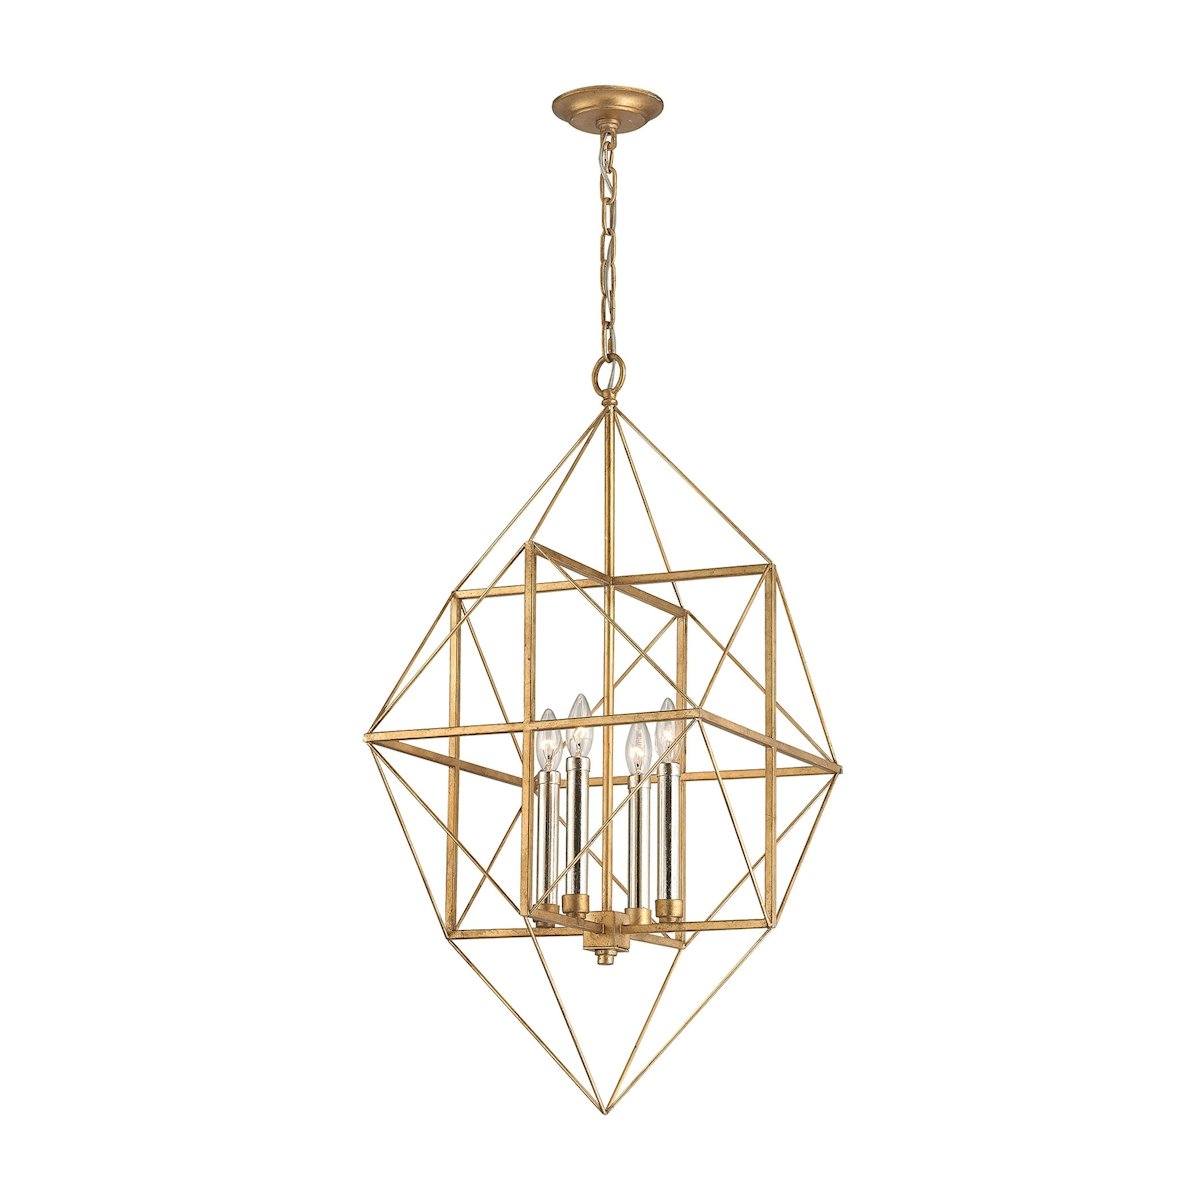 Connexions 4 Light Pendant In Antique Gold And Silver Leaf Ceiling Dimond Lighting 